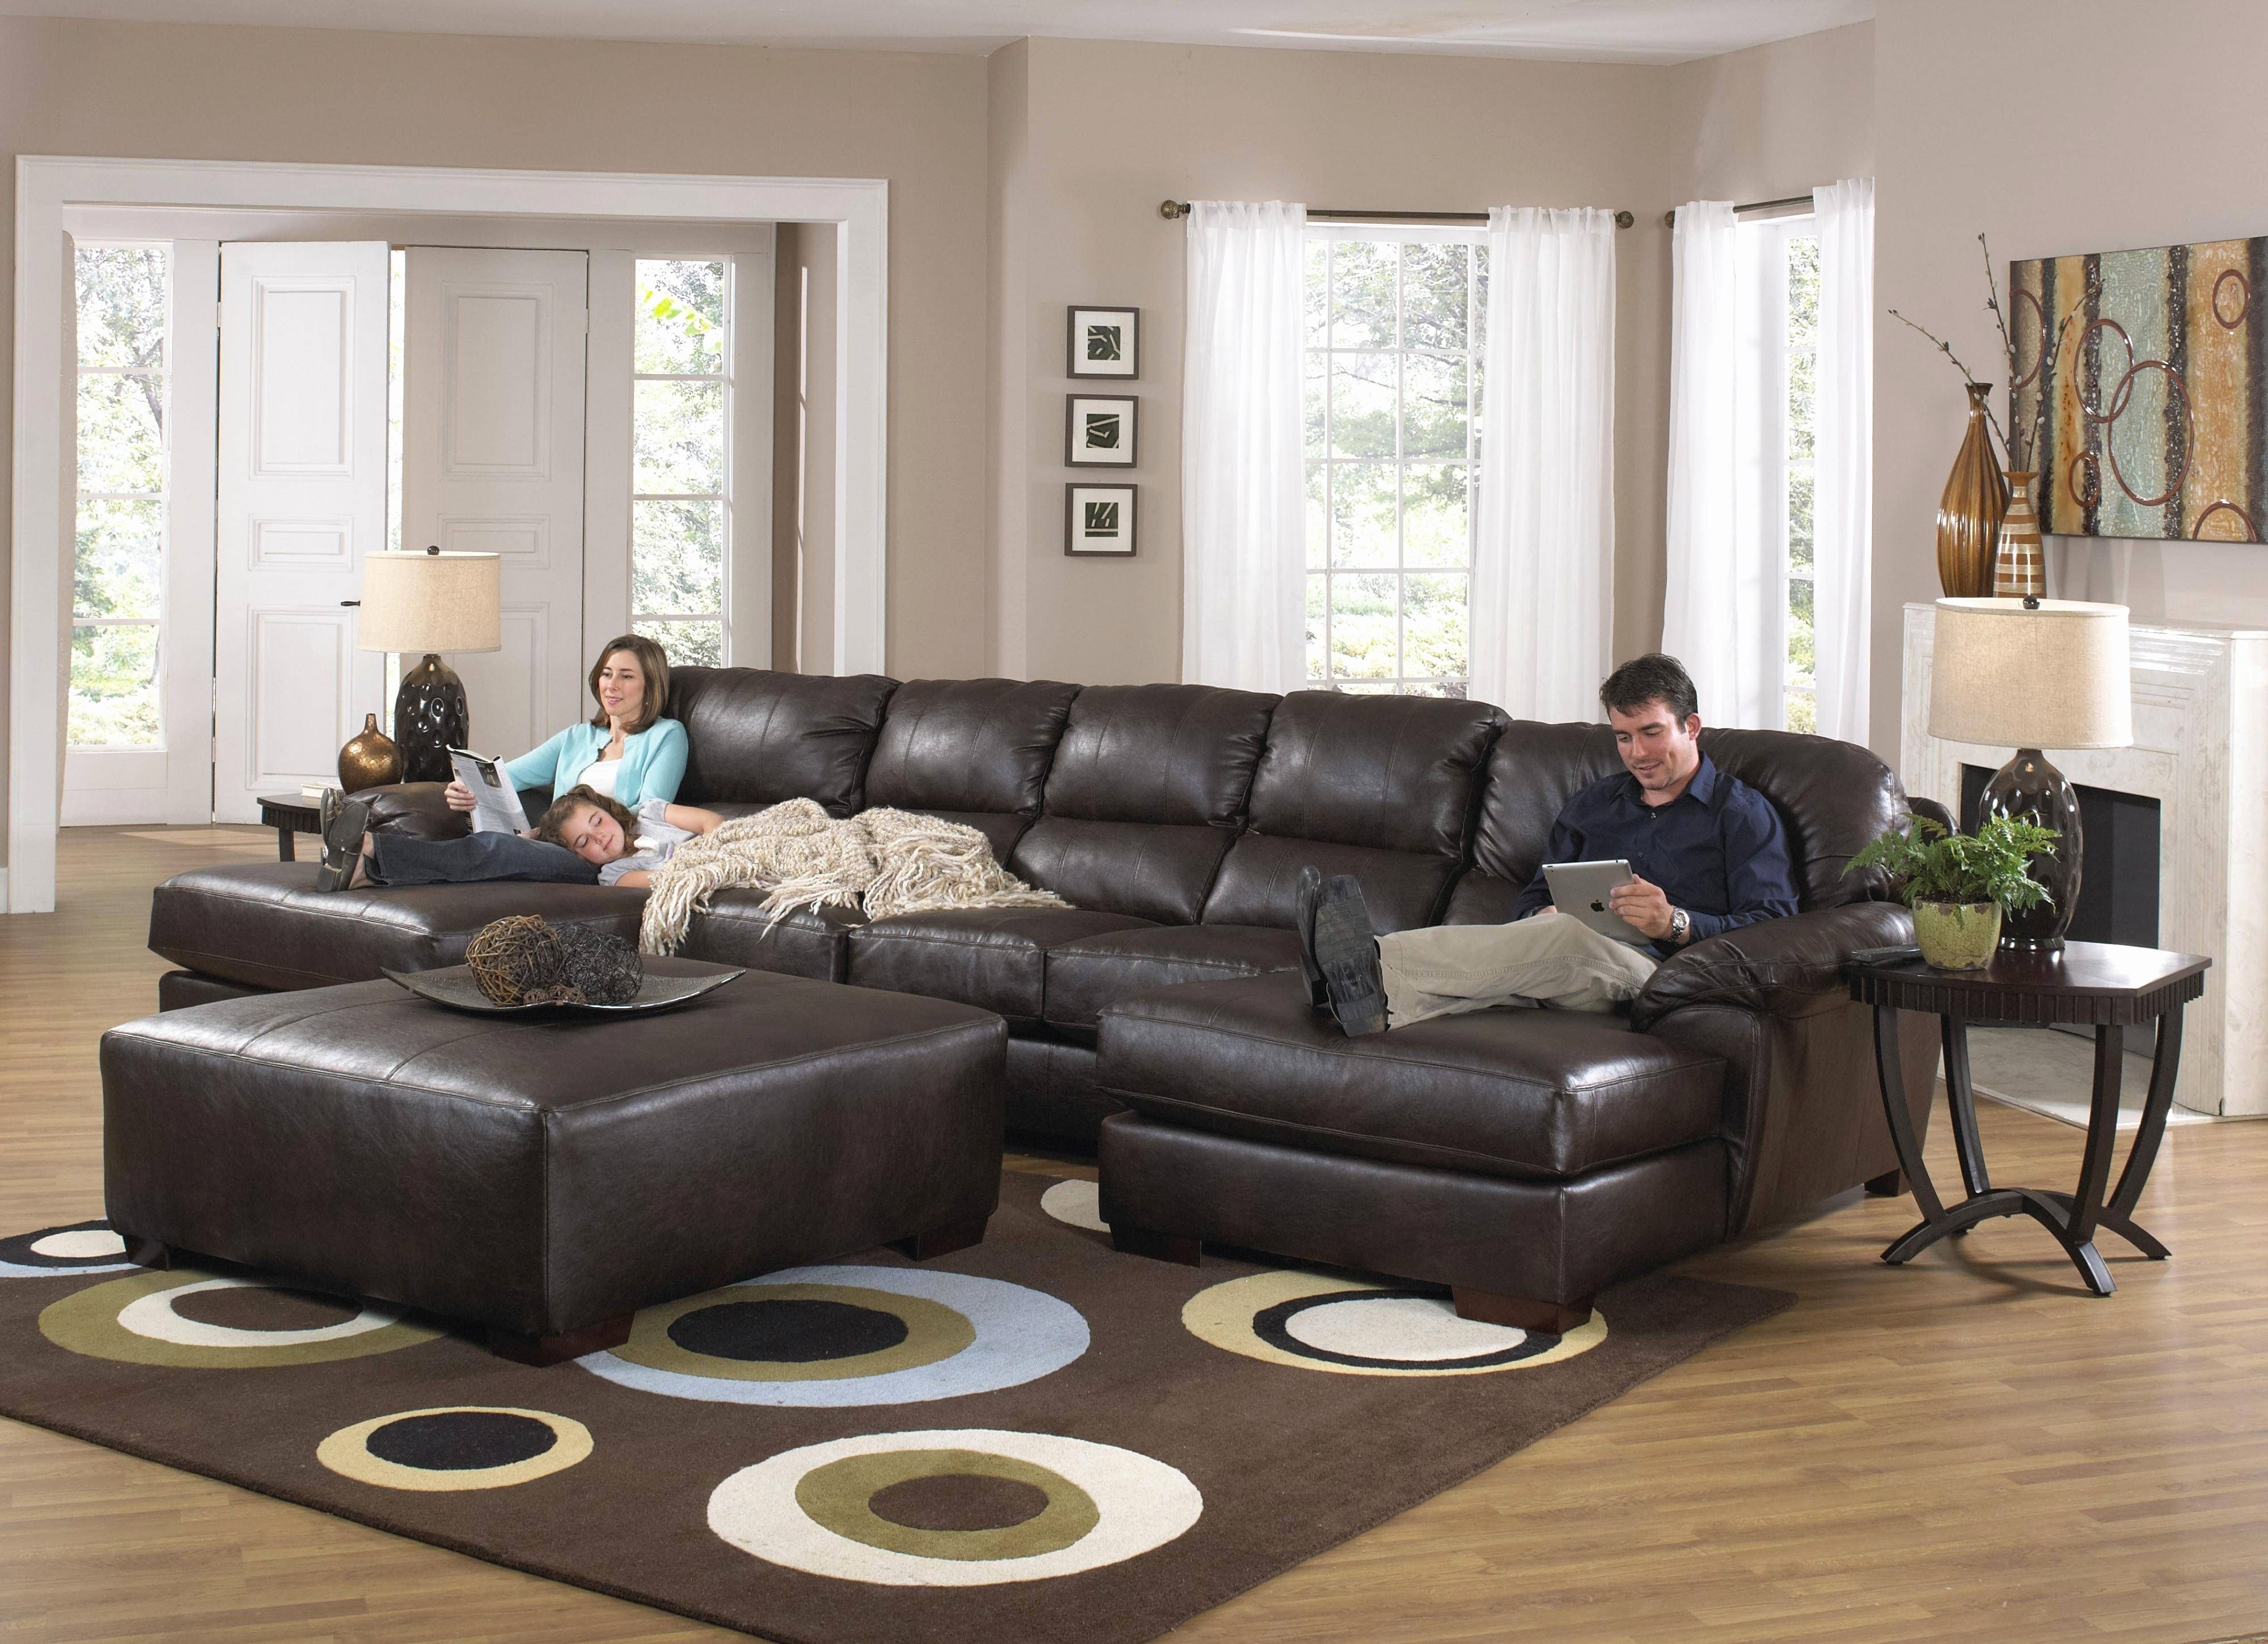 Best Sectional With Large Ottoman 2018 – Couches Ideas With Sectional Couches With Large Ottoman (View 14 of 15)